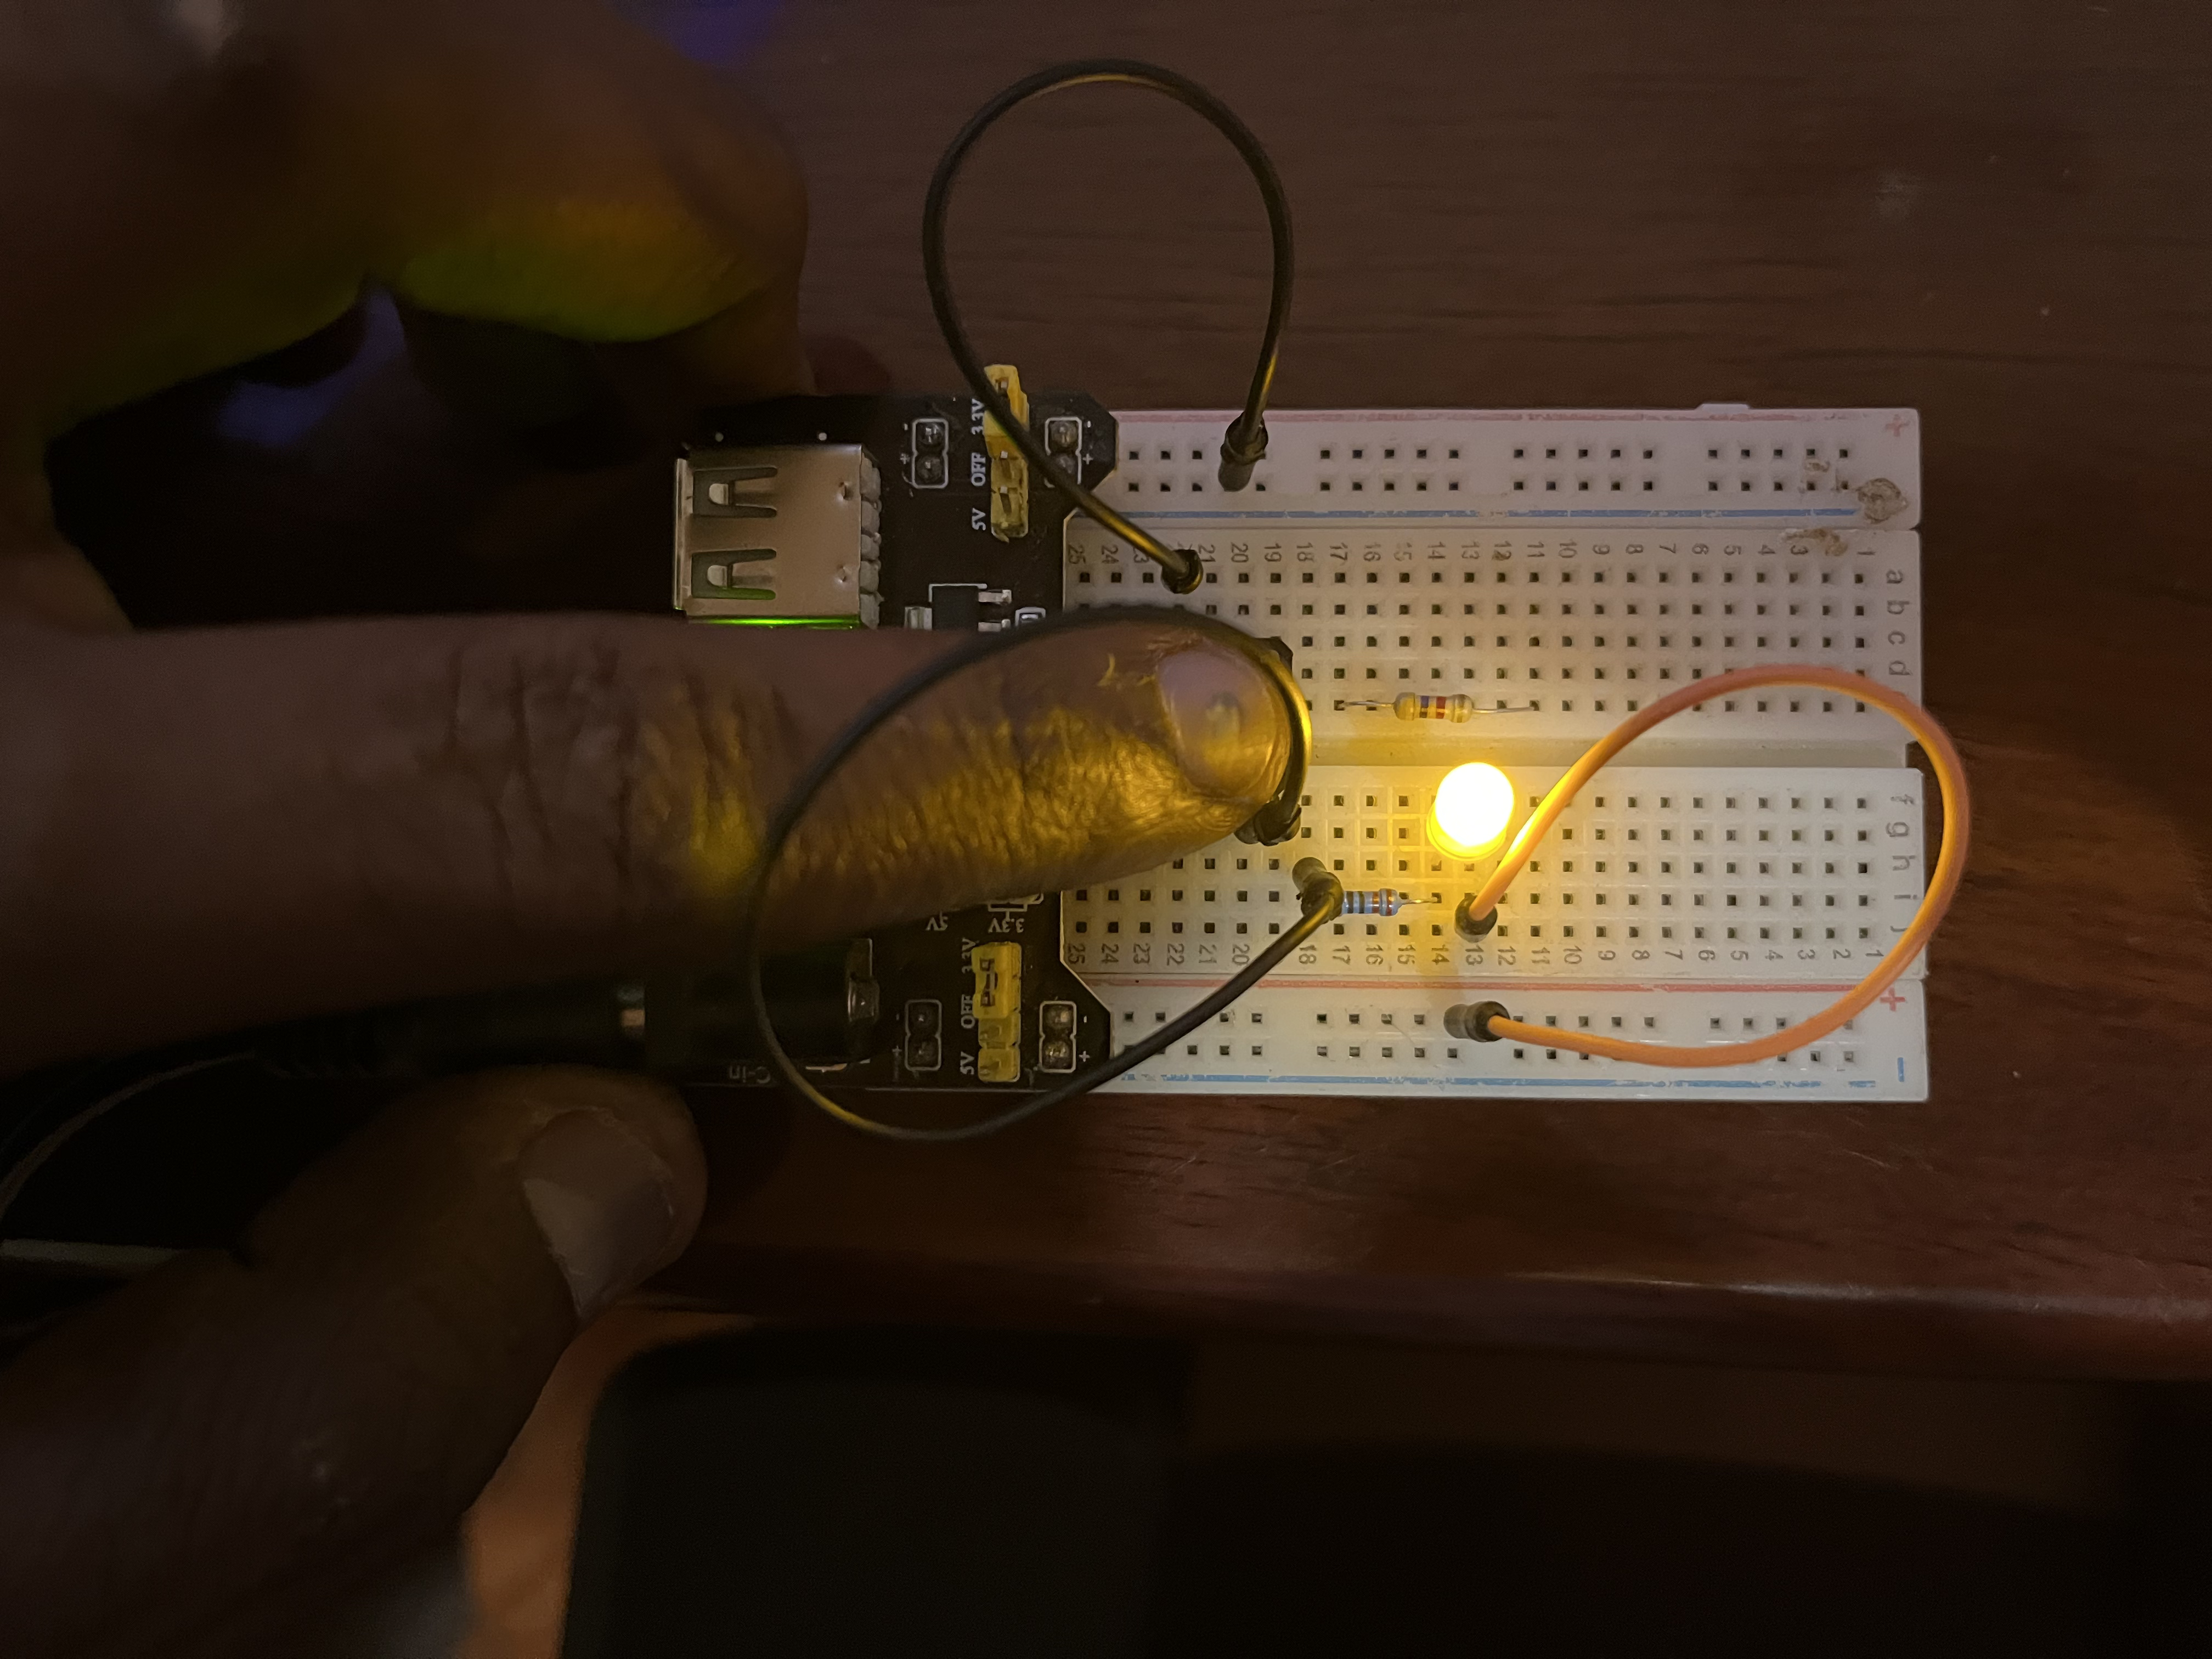 LED Hooked up to Breadboard Power Supply